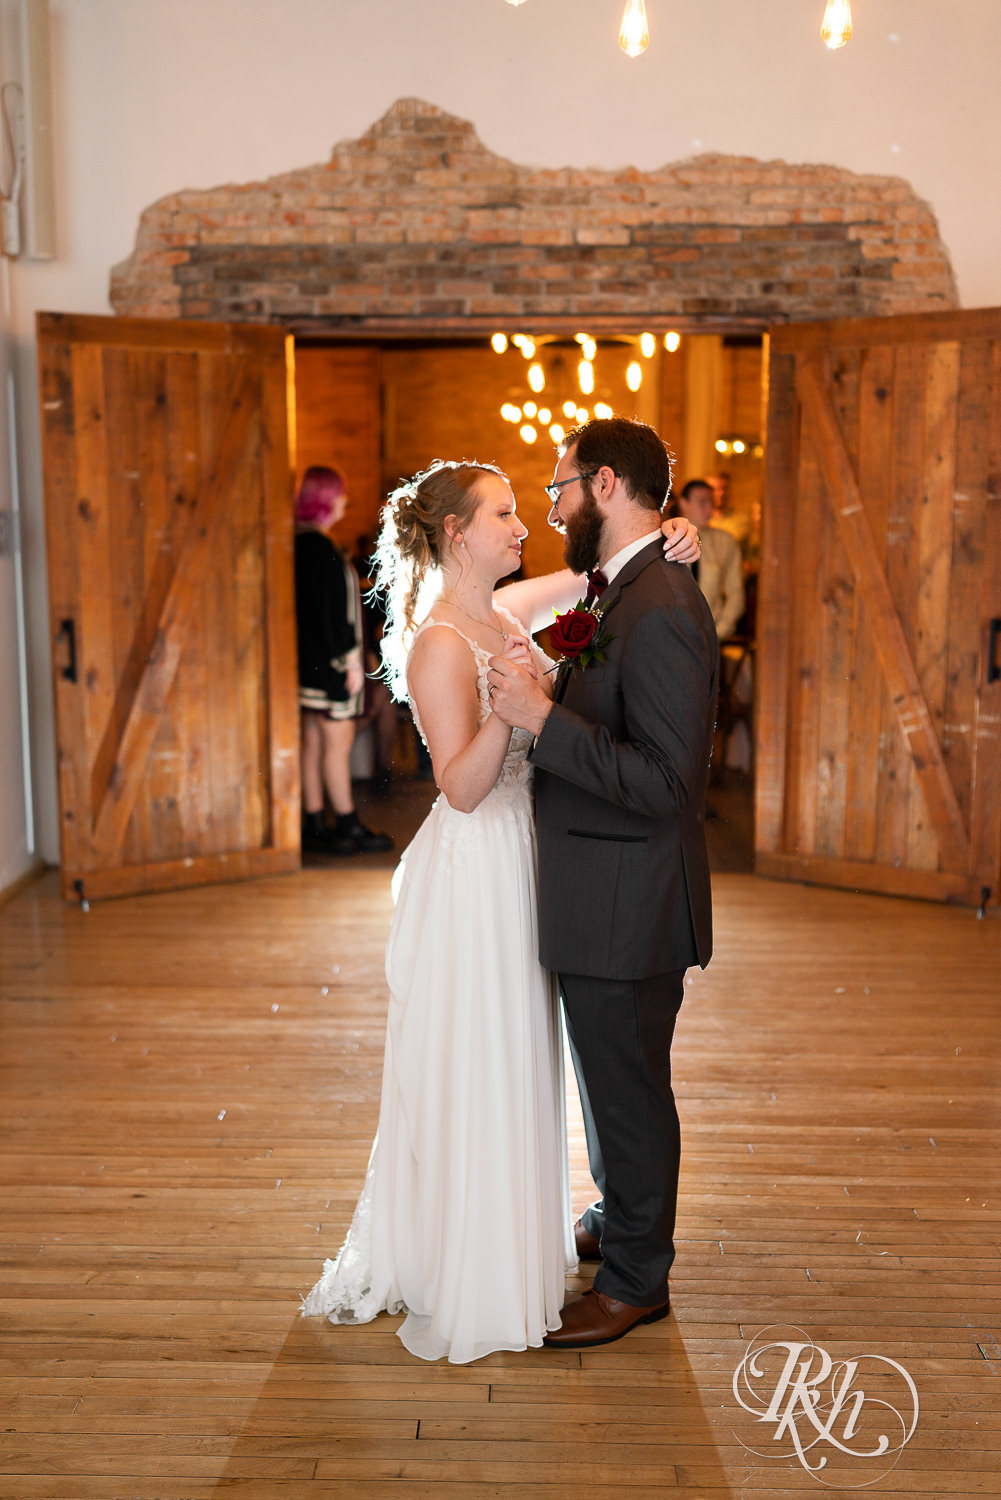 First dance at the Jerome Event Center in Delano, Minnesota.